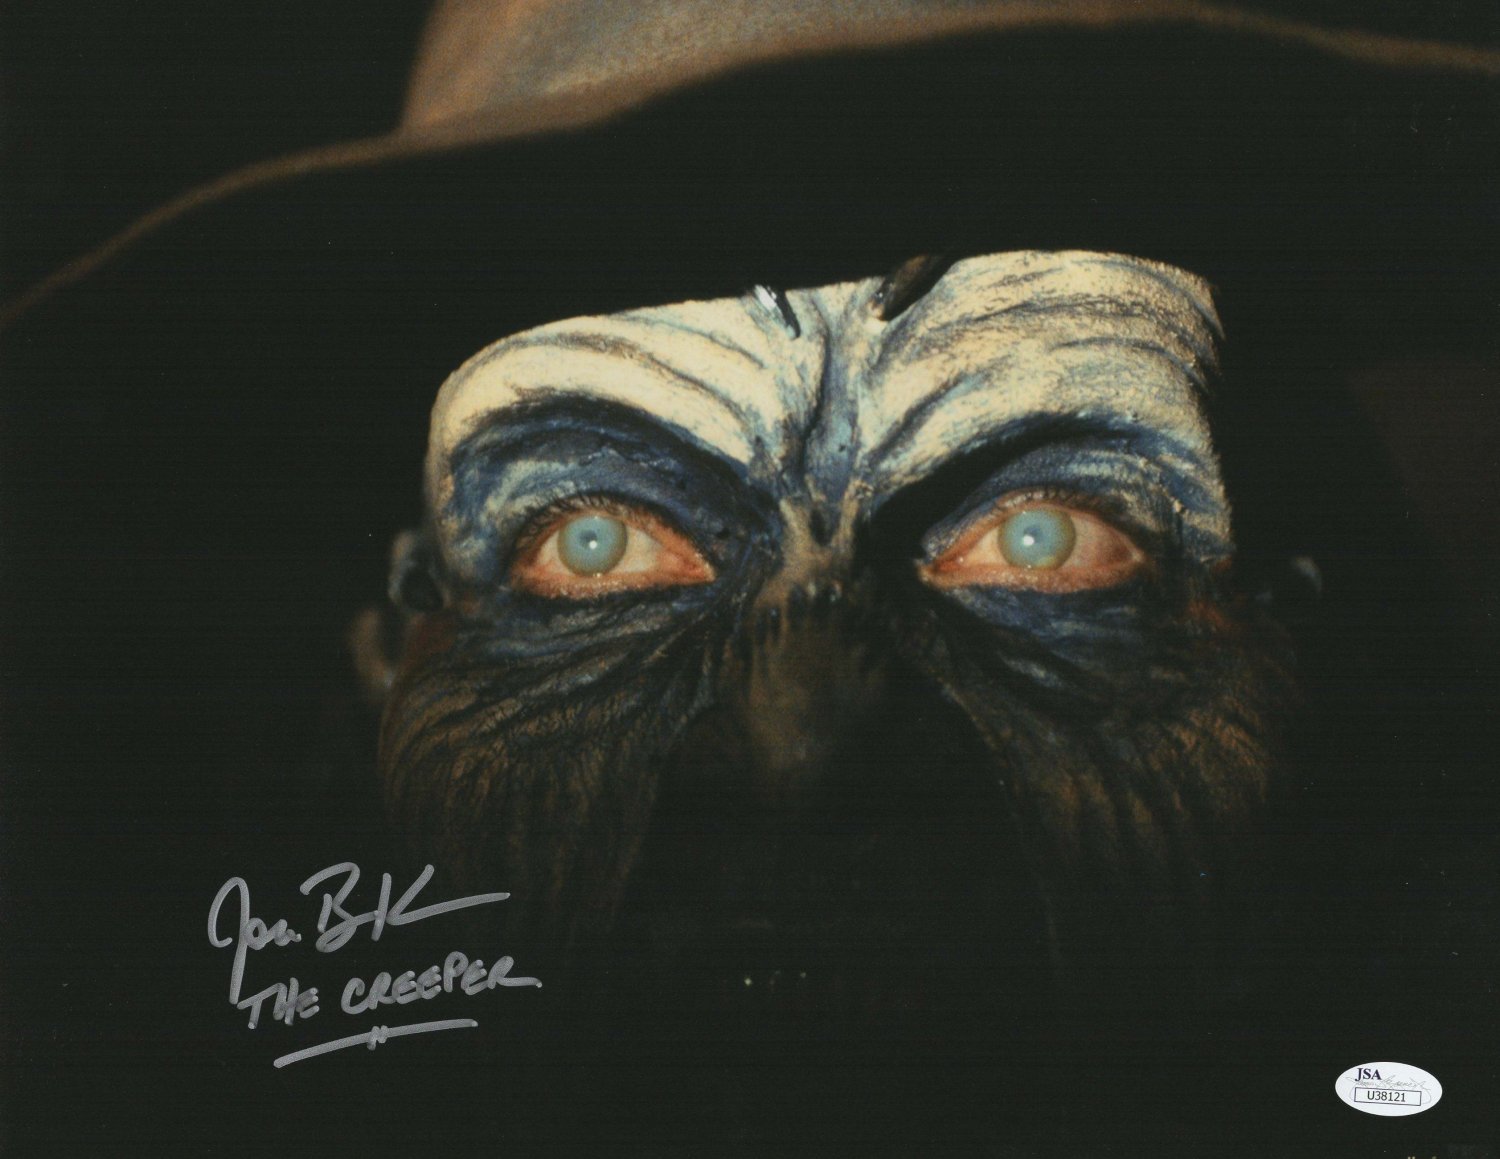 Jonathan Breck Signed & Mounted Jeepers Creepers 8 x 10" Autographed Photo (Reprint 2294)